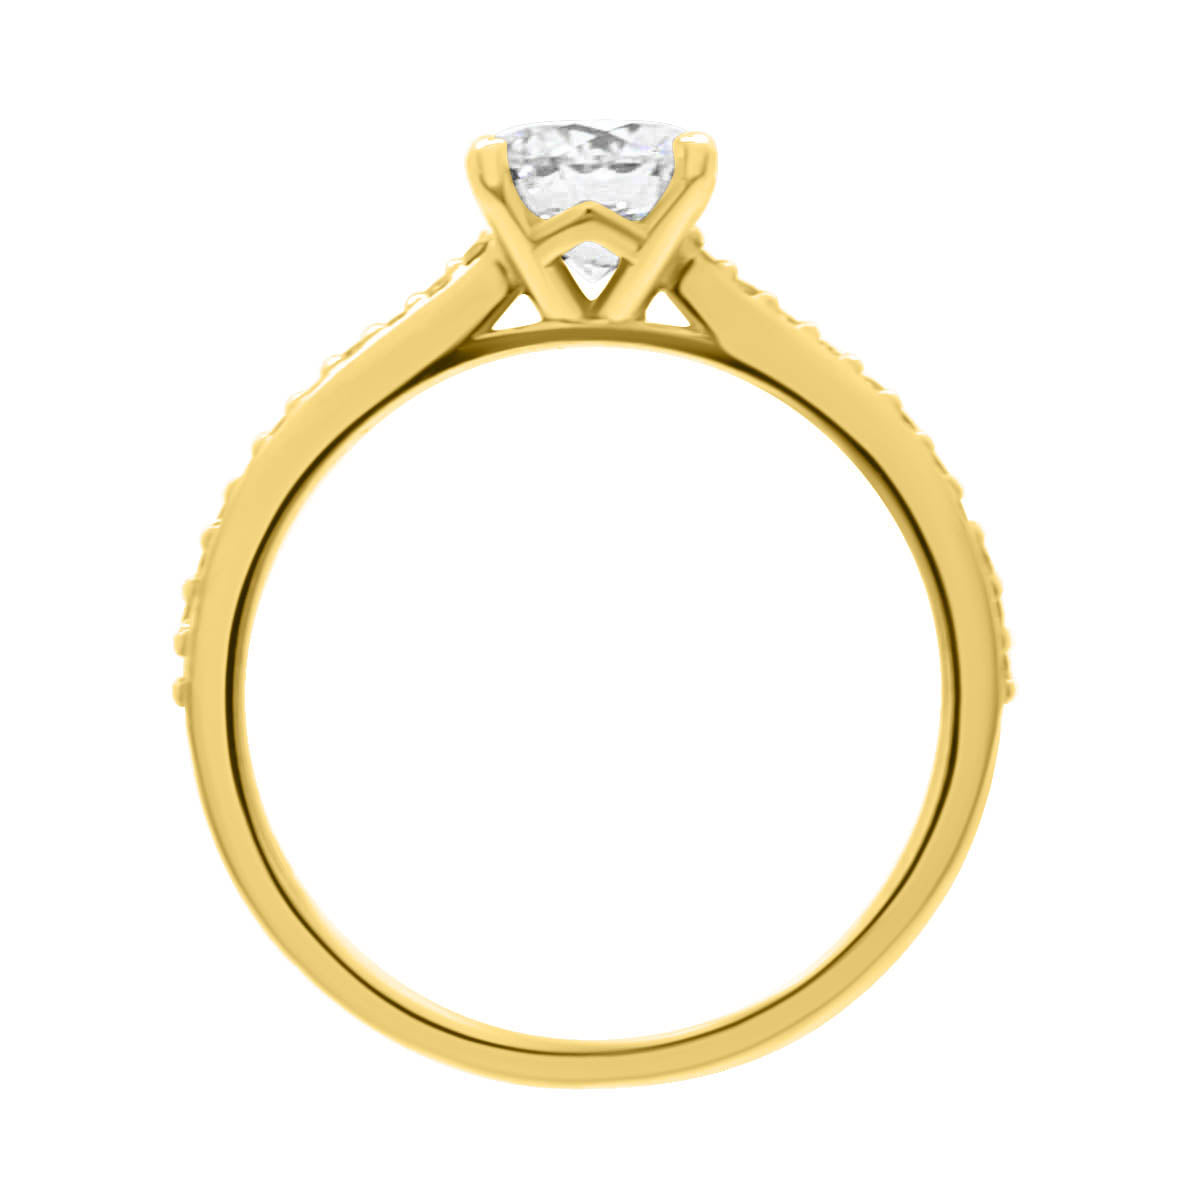 Solitaire with Diamond Shoulders in yellow gold in an upright position